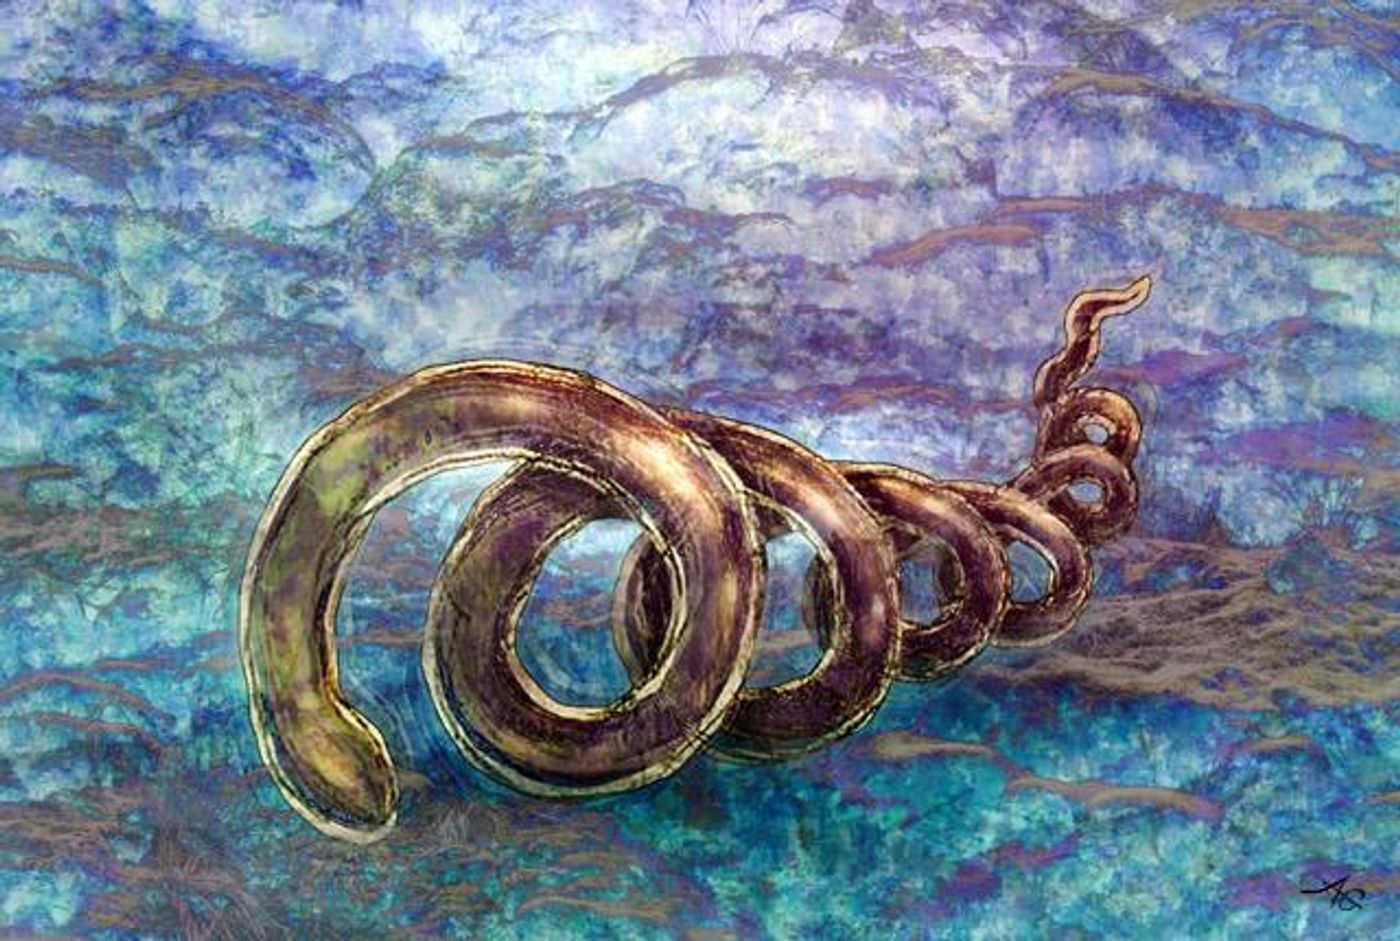 A watercolor-like illustration of Treponema pallidum, the bacterium that causes syphilis. / Credit: Alice C. Gray